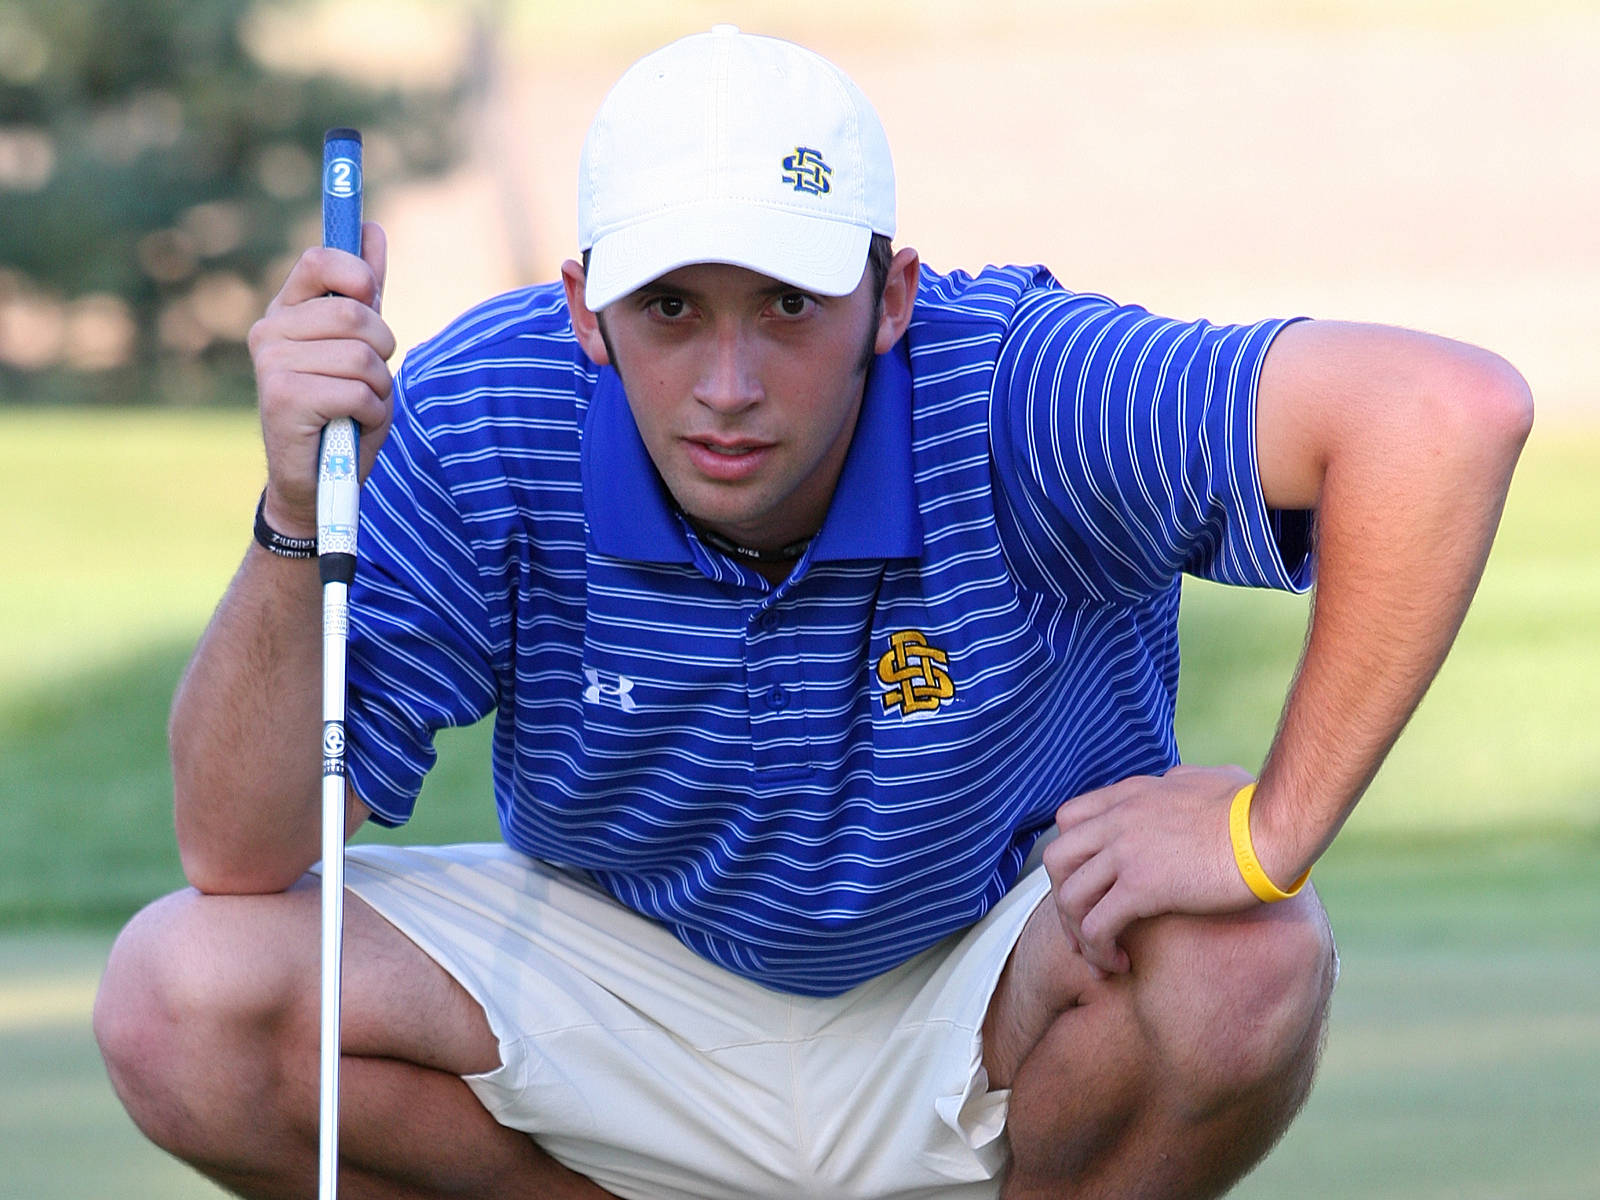 South Dakota State University’s men’s golf coach Parker Edens lines up a putt in this file photo from GoJacks.com. Edens made it to the quarterfinals of the US Mid-Am tournament held in Scarborough, New York earlier this month. 